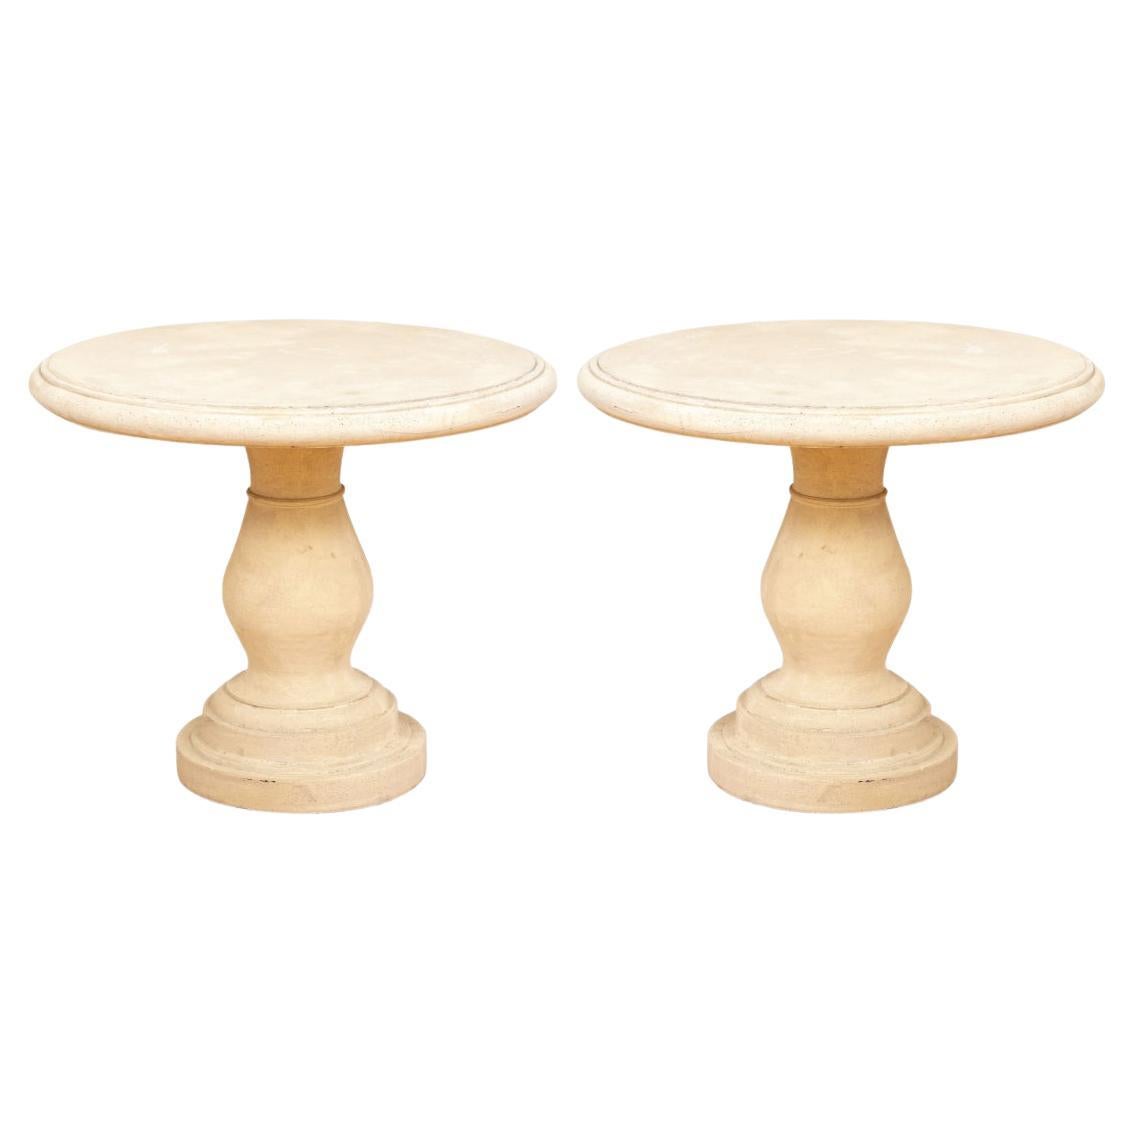 Sophisticated Pair Of Cast Faux Stone Round Pedestal Side Tables For Sale